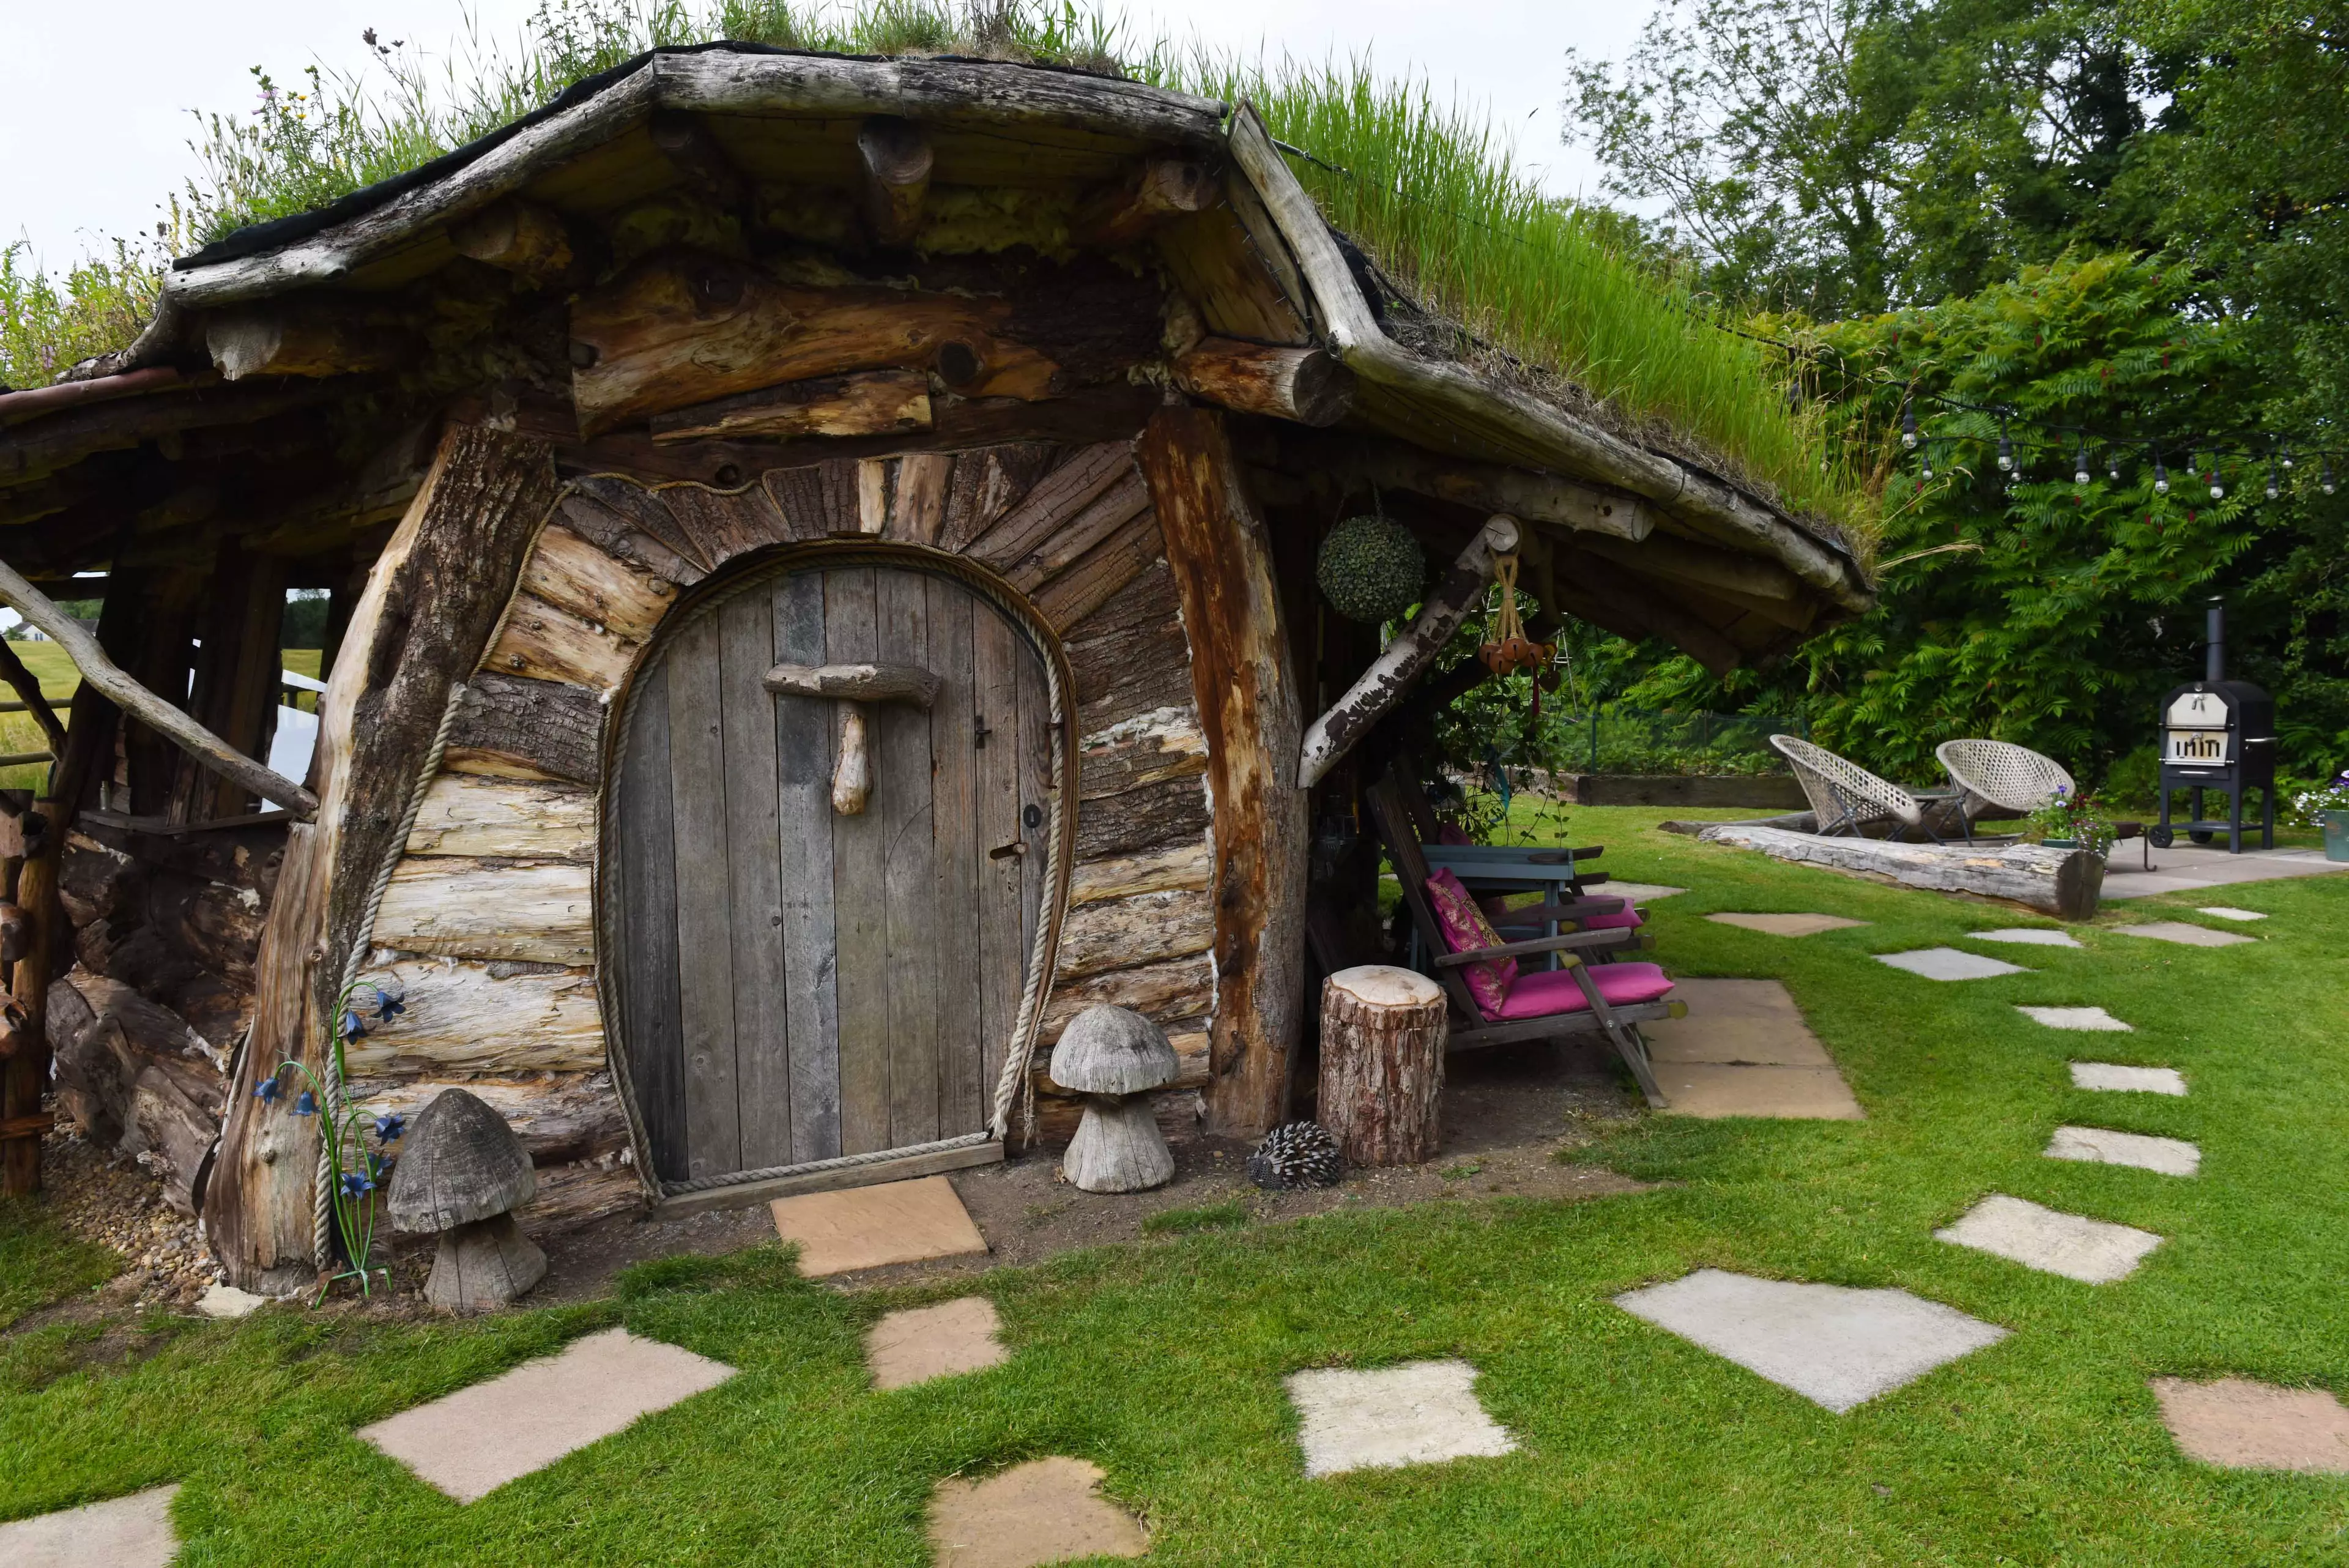 The magical outhouse is surrounded by stepping stones (